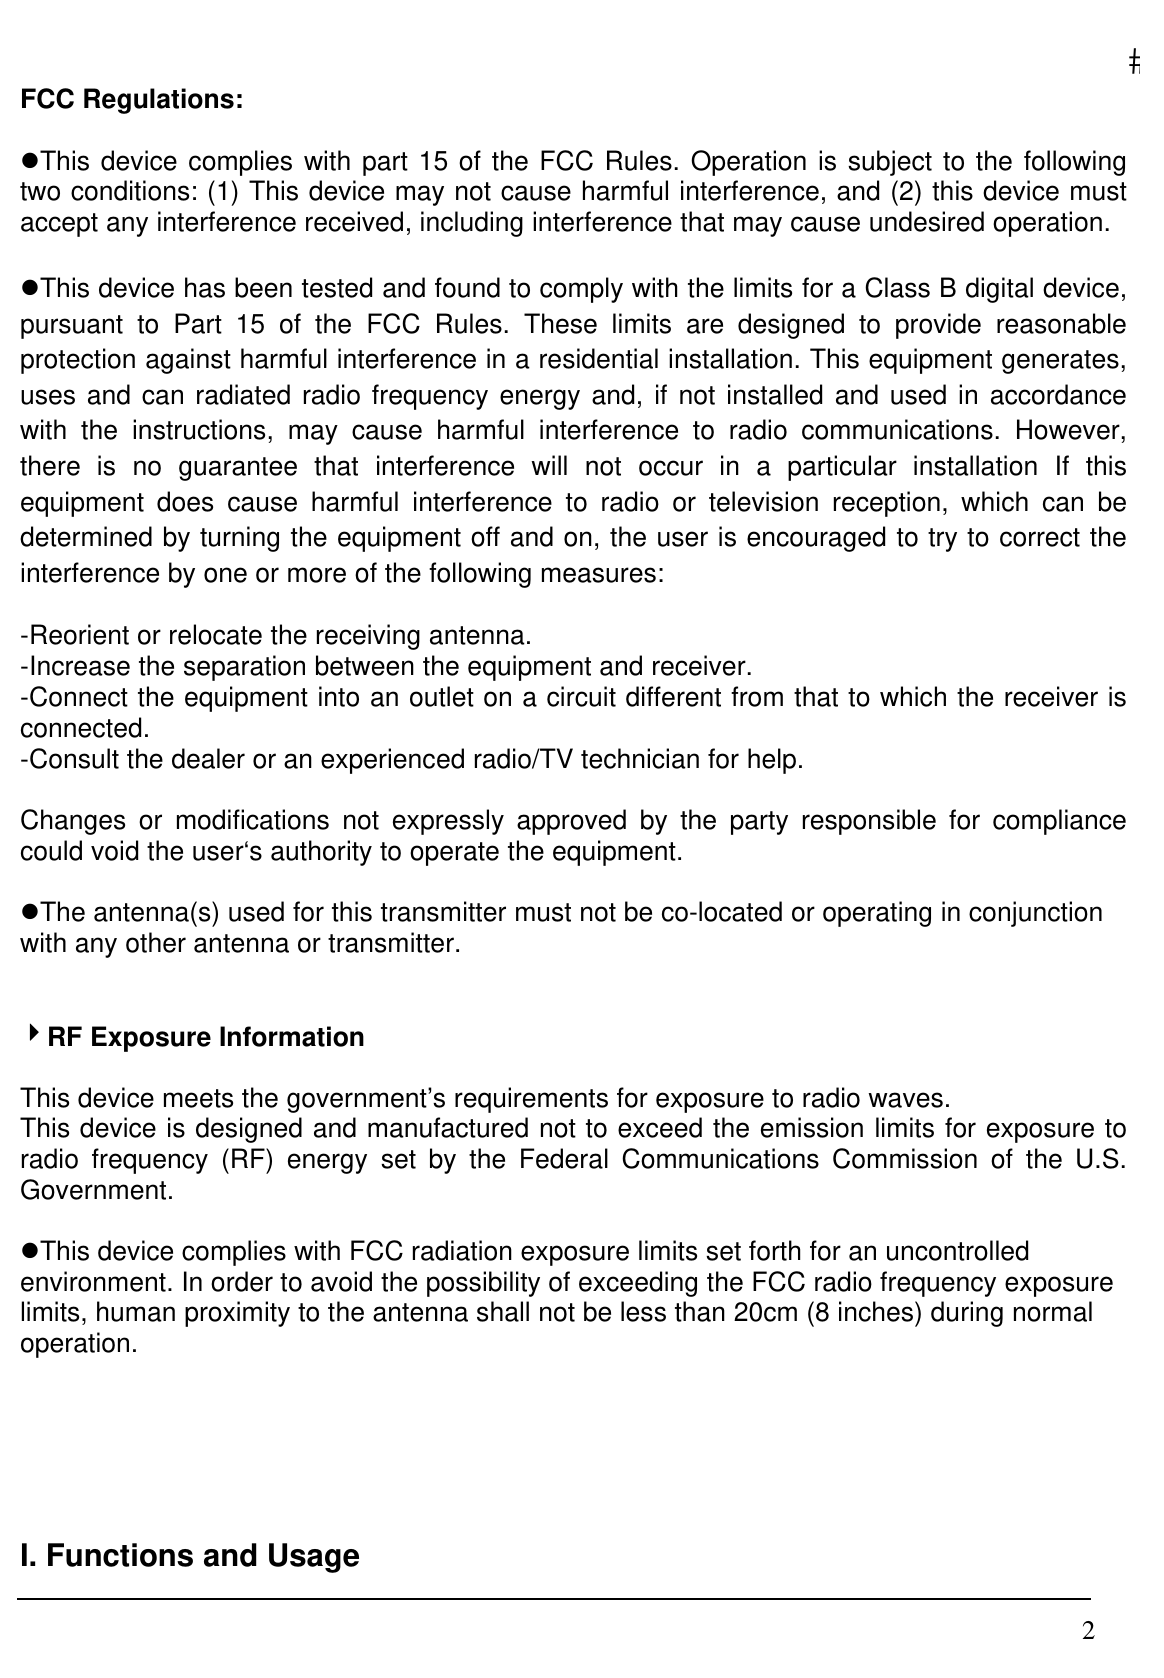   2FCC Regulations:  zThis device complies with part 15 of the FCC Rules. Operation is subject to the following two conditions: (1) This device may not cause harmful interference, and (2) this device must accept any interference received, including interference that may cause undesired operation.  zThis device has been tested and found to comply with the limits for a Class B digital device, pursuant to Part 15 of the FCC Rules. These limits are designed to provide reasonable protection against harmful interference in a residential installation. This equipment generates, uses and can radiated radio frequency energy and, if not installed and used in accordance with the instructions, may cause harmful interference to radio communications. However, there is no guarantee that interference will not occur in a particular installation If this equipment does cause harmful interference to radio or television reception, which can be determined by turning the equipment off and on, the user is encouraged to try to correct the interference by one or more of the following measures:  -Reorient or relocate the receiving antenna. -Increase the separation between the equipment and receiver. -Connect the equipment into an outlet on a circuit different from that to which the receiver is connected. -Consult the dealer or an experienced radio/TV technician for help.  Changes or modifications not expressly approved by the party responsible for compliance could void the user‘s authority to operate the equipment.  zThe antenna(s) used for this transmitter must not be co-located or operating in conjunction with any other antenna or transmitter.   4RF Exposure Information  This device meets the government’s requirements for exposure to radio waves. This device is designed and manufactured not to exceed the emission limits for exposure to radio frequency (RF) energy set by the Federal Communications Commission of the U.S. Government.  zThis device complies with FCC radiation exposure limits set forth for an uncontrolled environment. In order to avoid the possibility of exceeding the FCC radio frequency exposure limits, human proximity to the antenna shall not be less than 20cm (8 inches) during normal operation.      I. Functions and Usage  